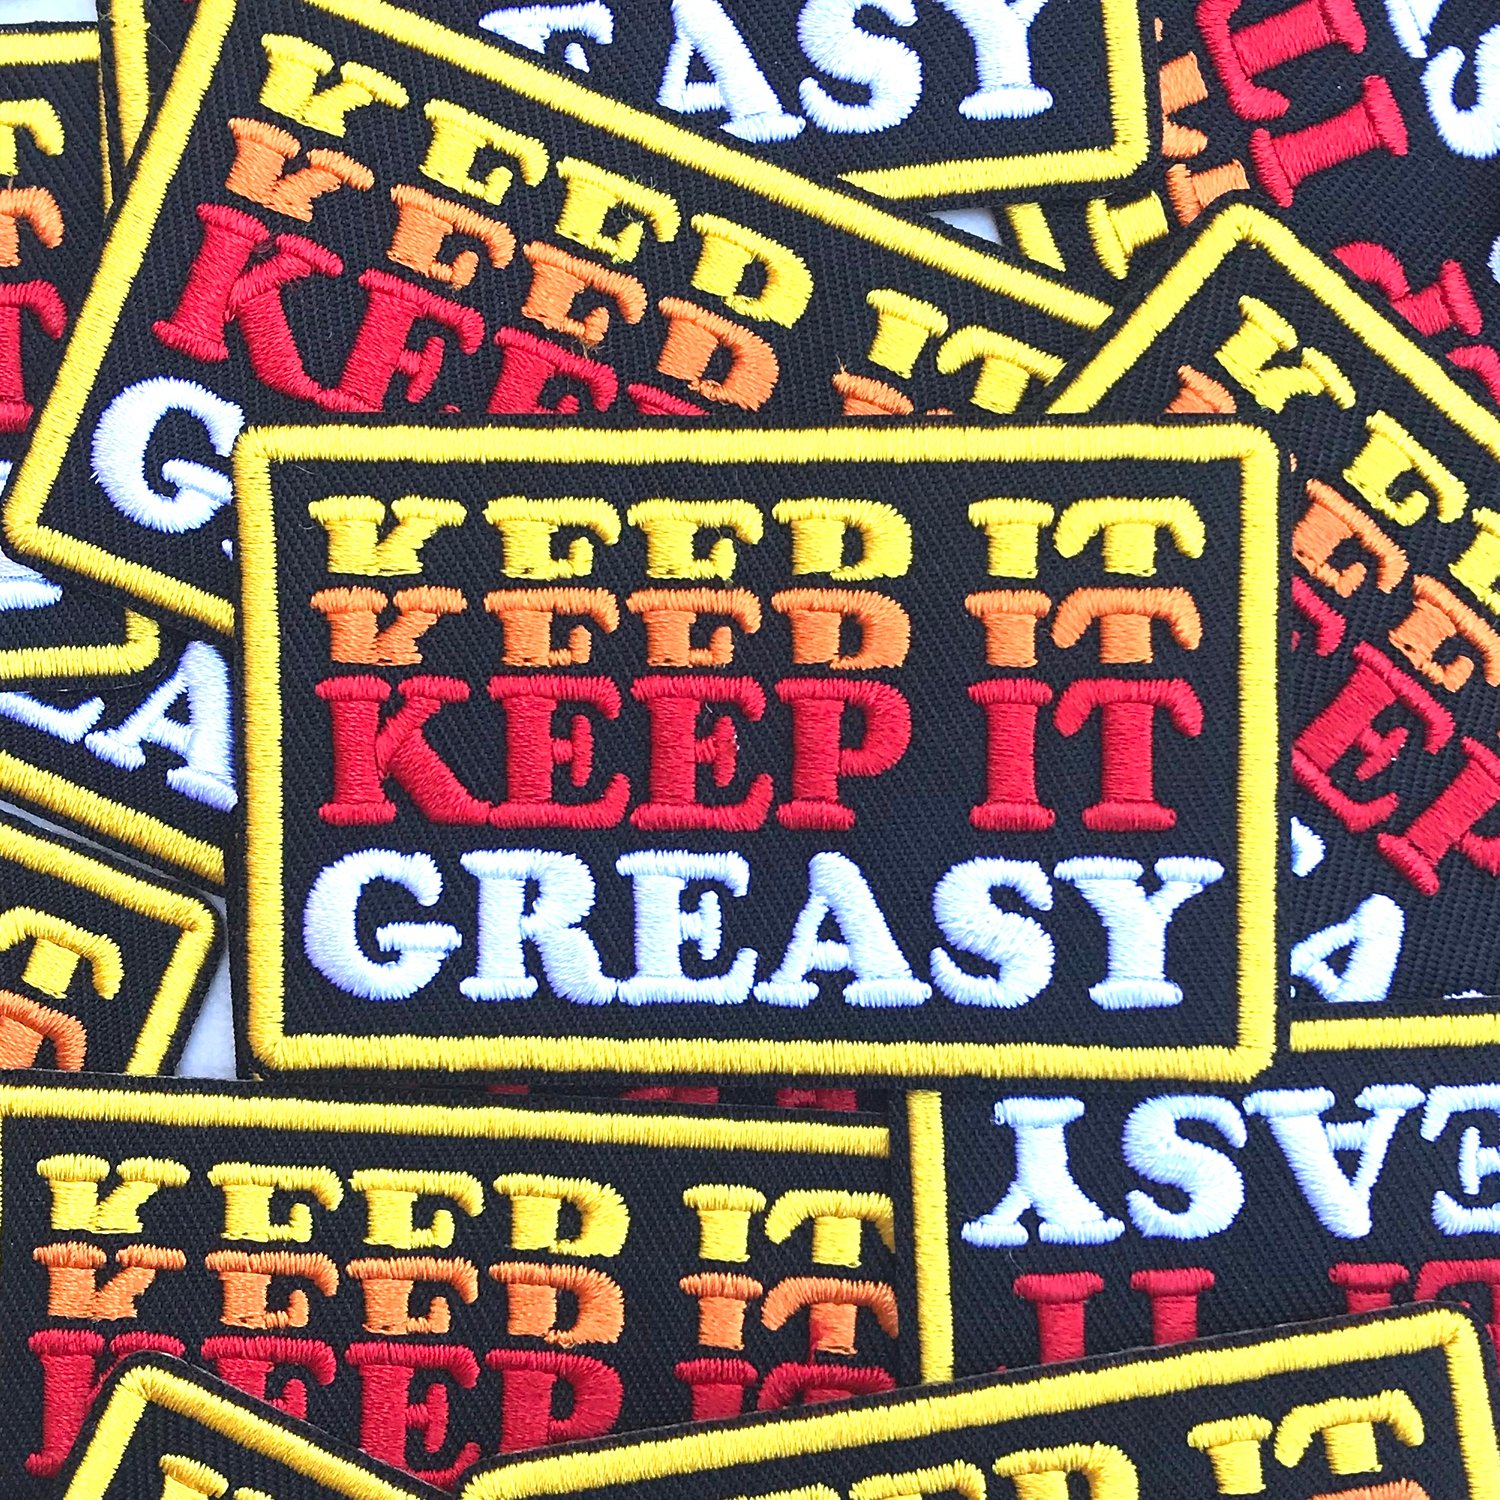 Keep It Greasy Retro Patch